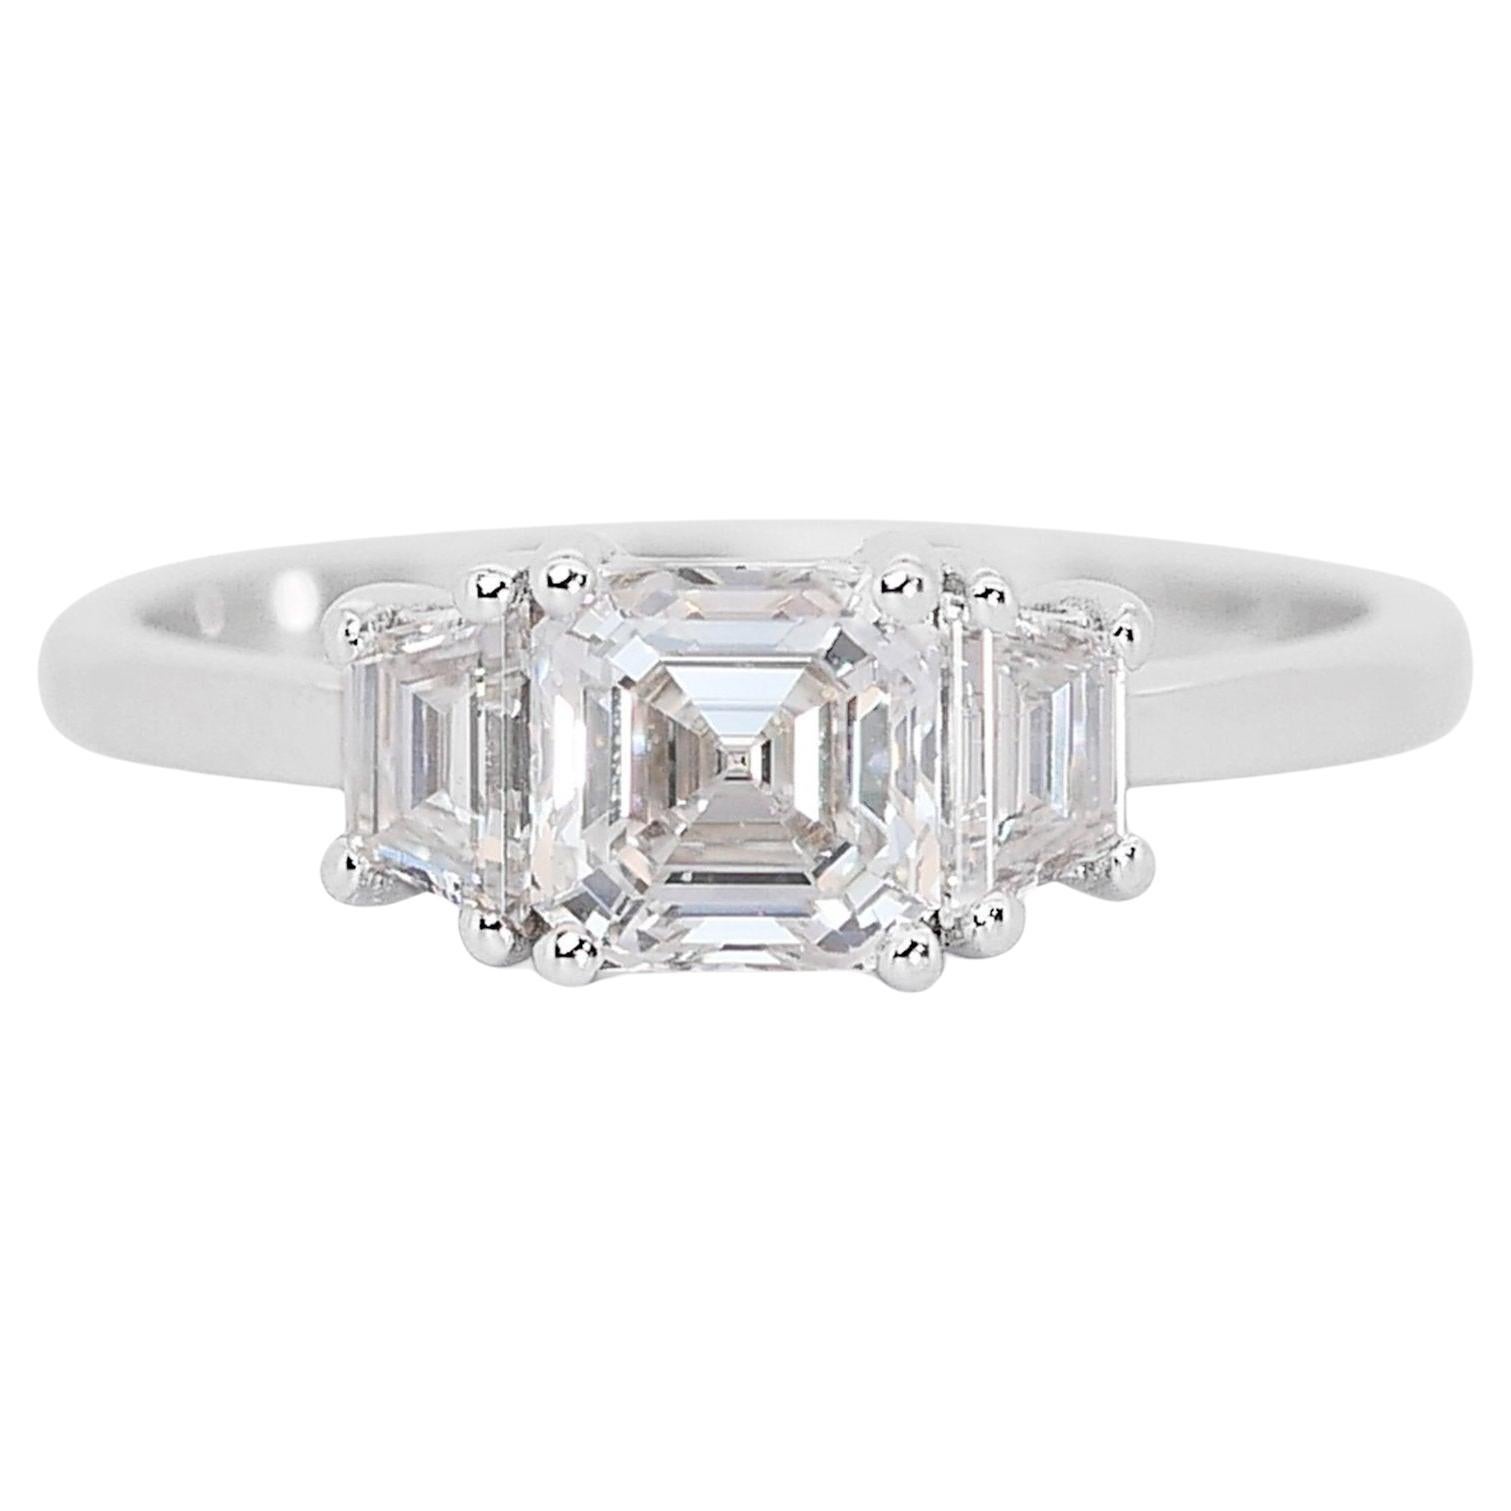 Sophisticated 1.64ct Diamond 3-Stone Ring in 18k White Gold - GIA Certified For Sale